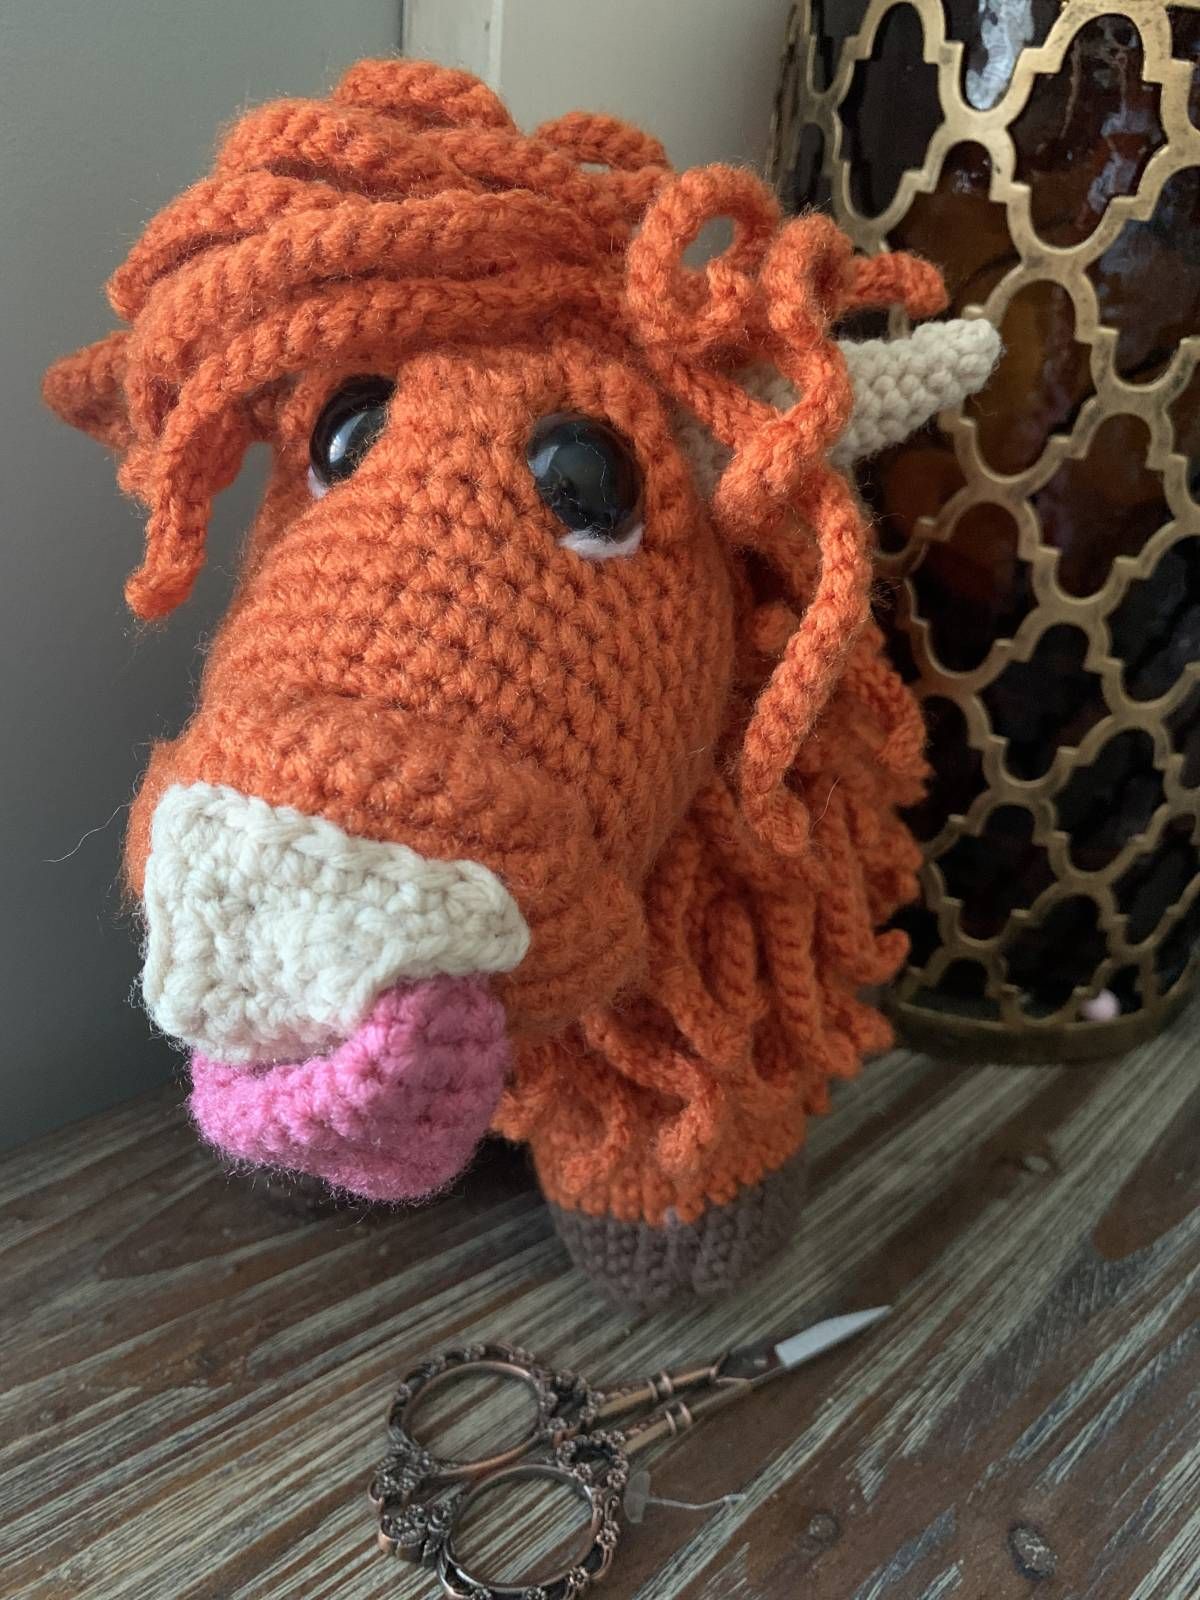 Highland Cow Crochet Amigurumi Doll Pattern Review by Cindy Green for Cottontail Whiskers